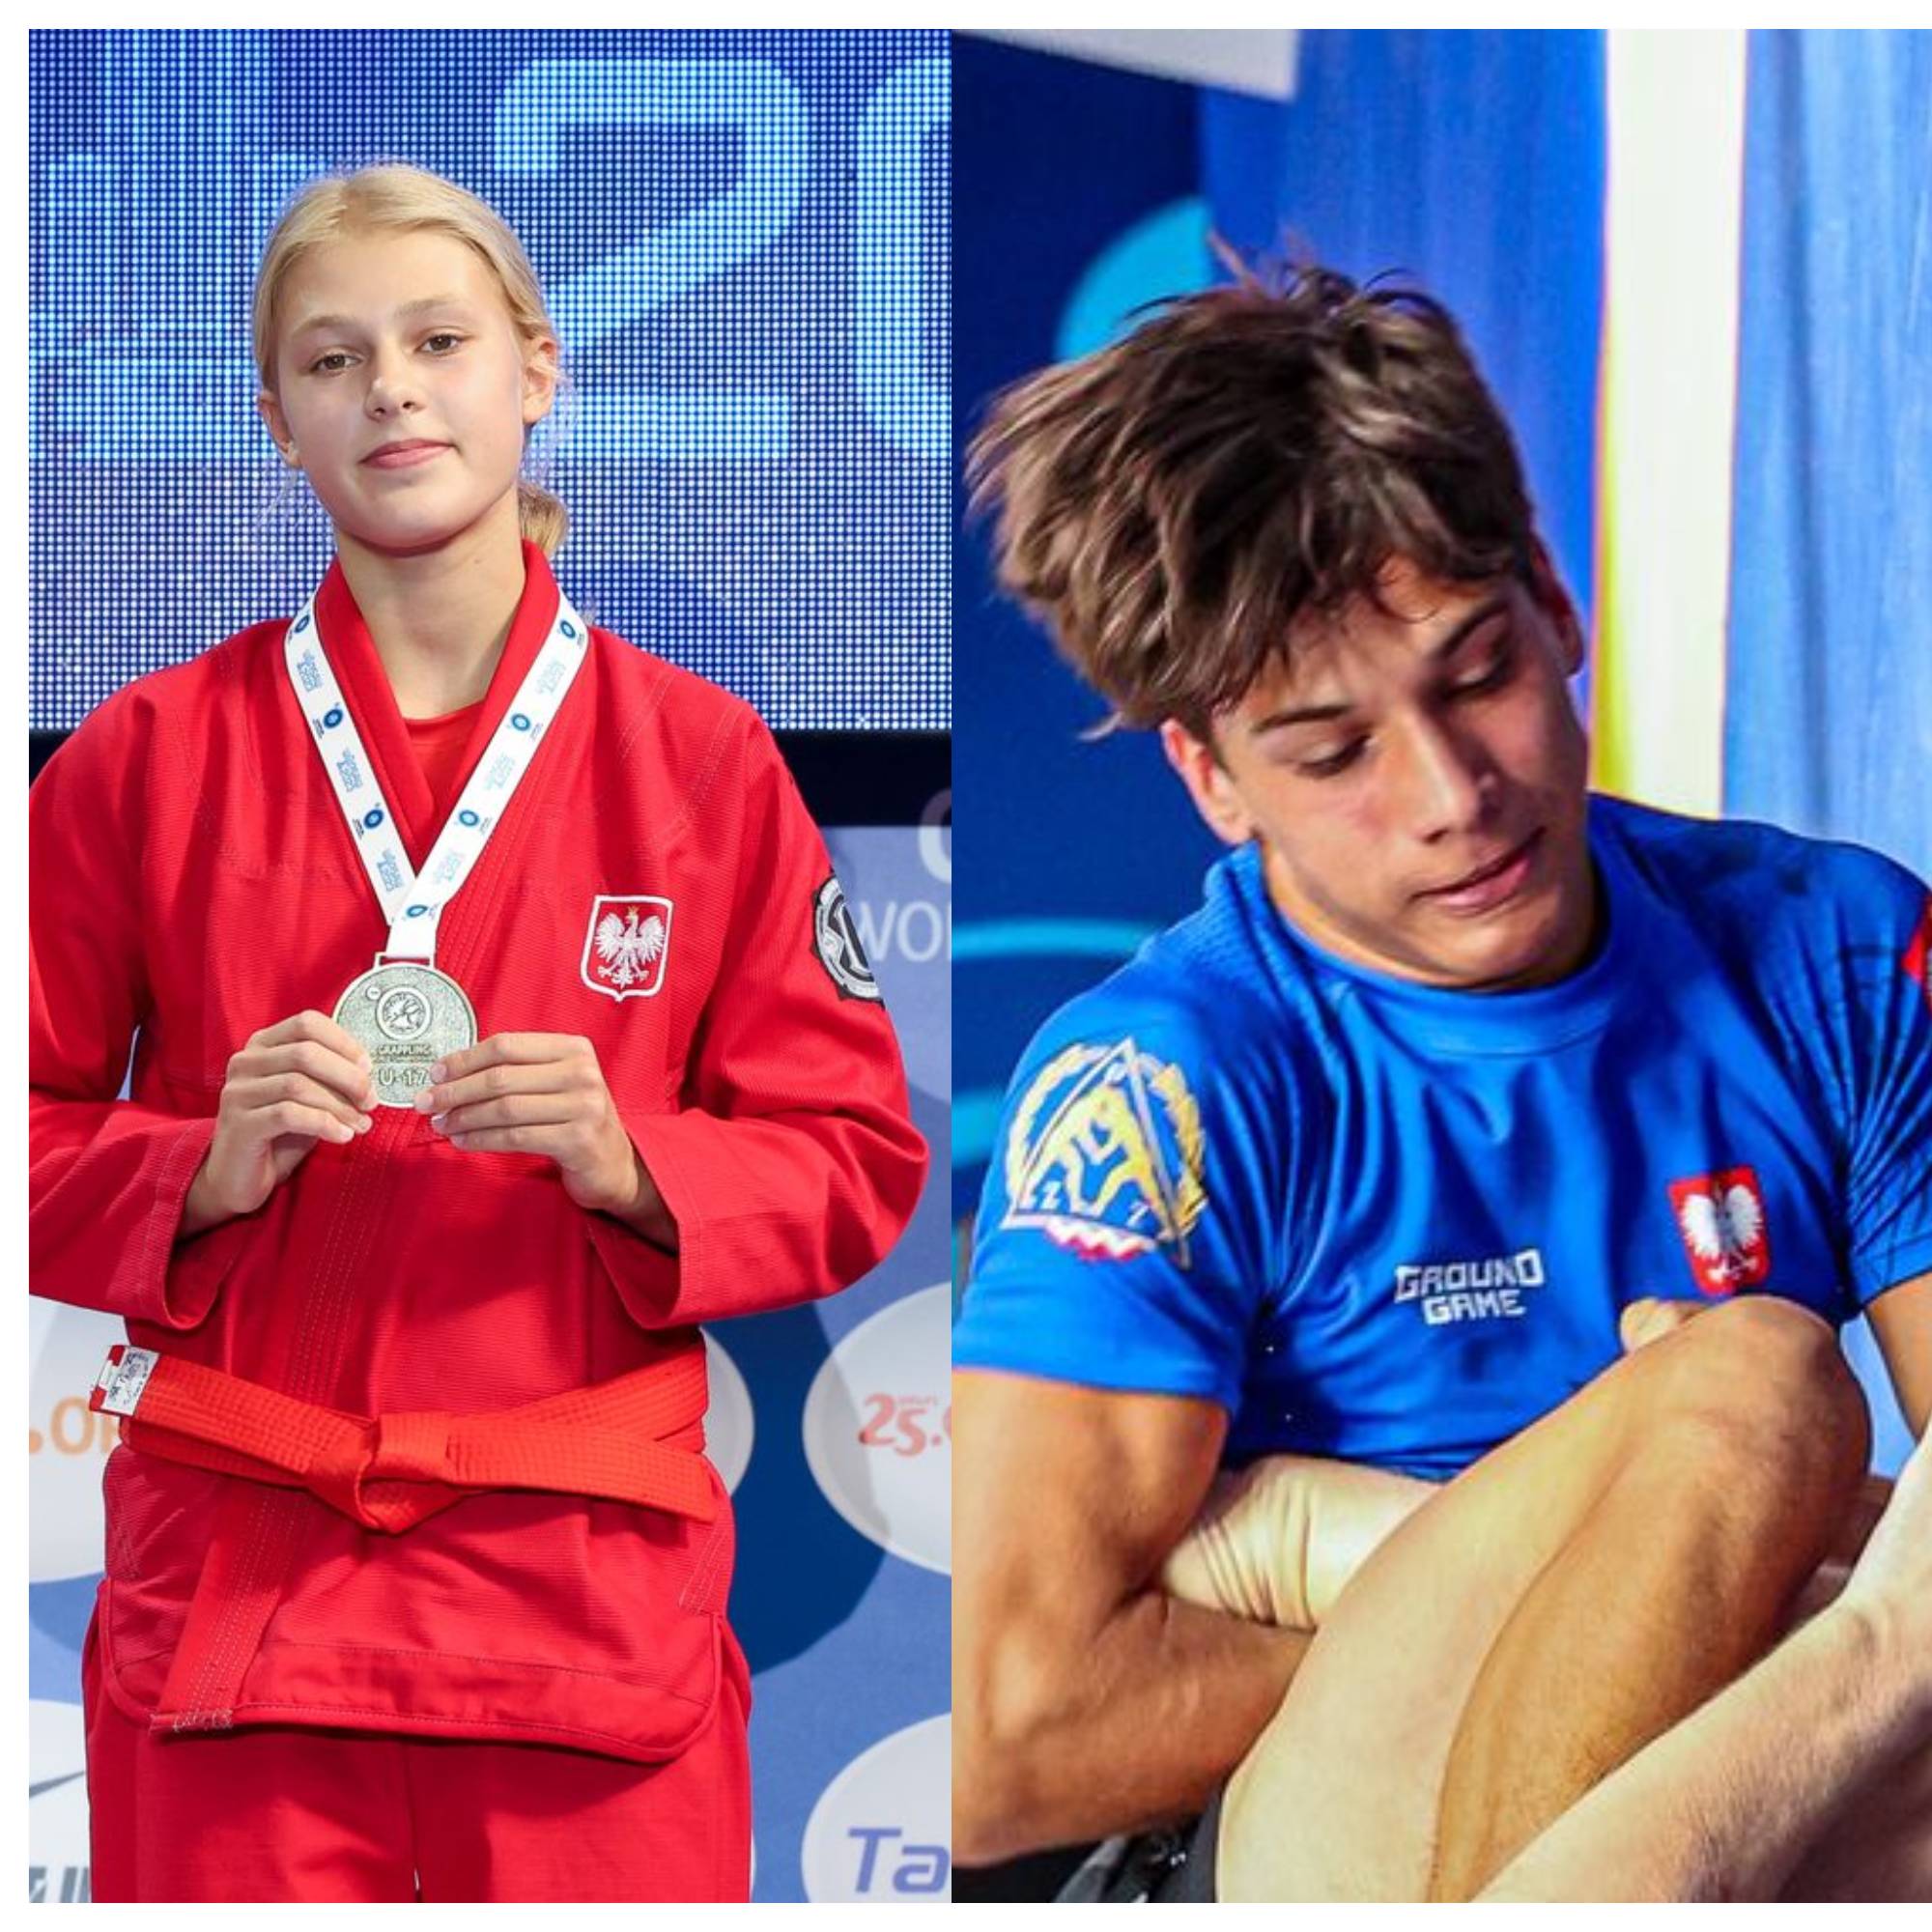 Grappling World Championships Medalists